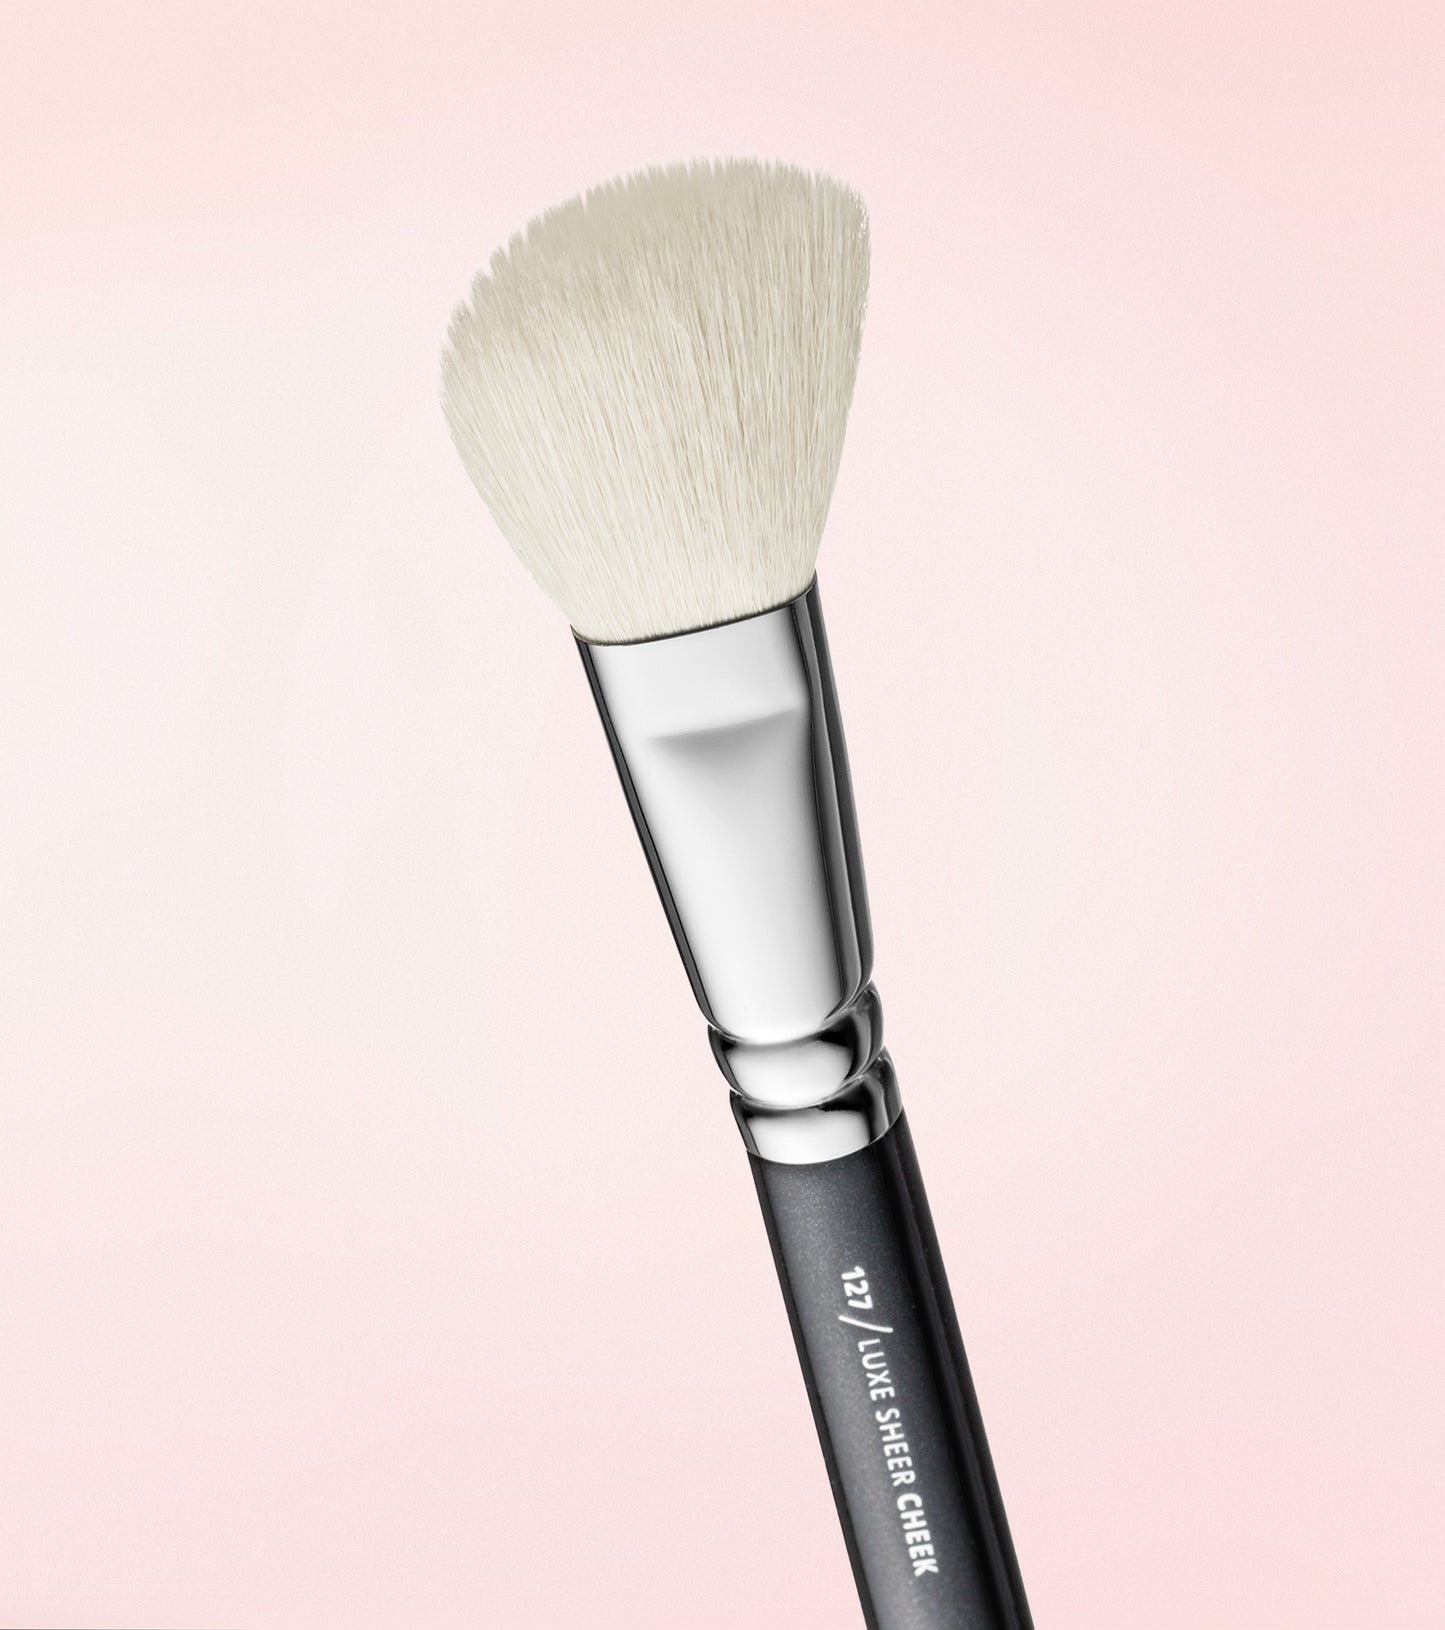 127 Luxe Sheer Cheek Brush Expanded Image 2